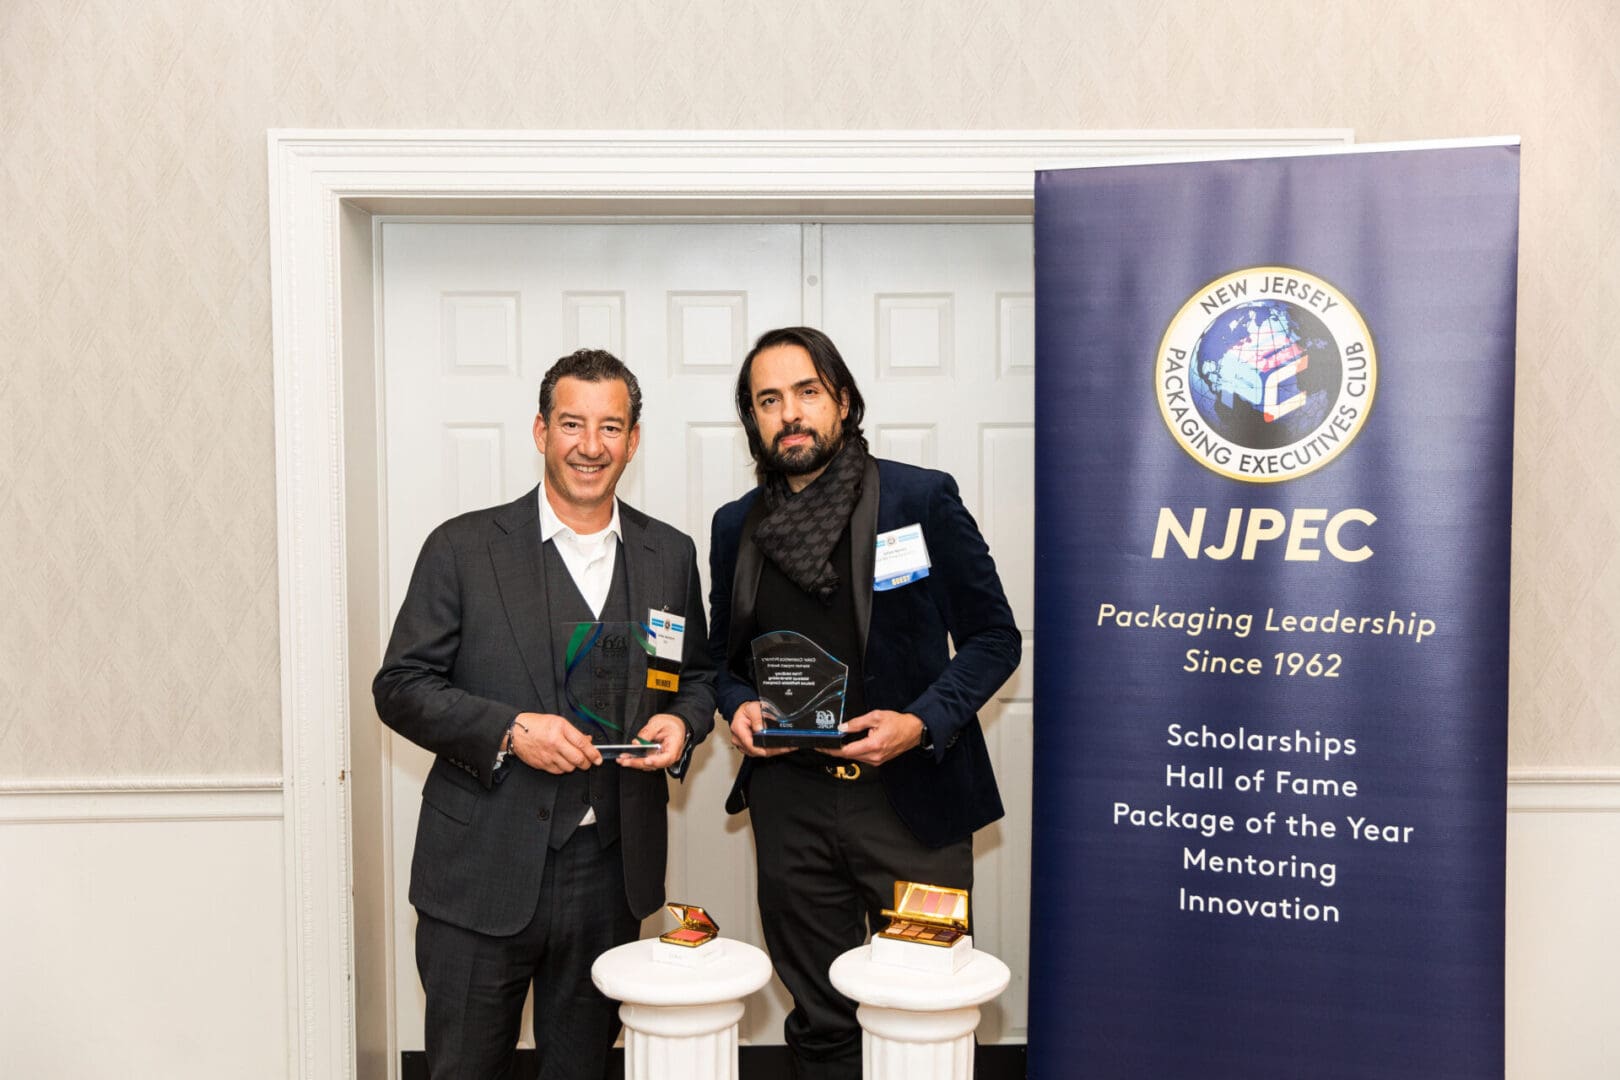 Two men standing next to each other holding awards.